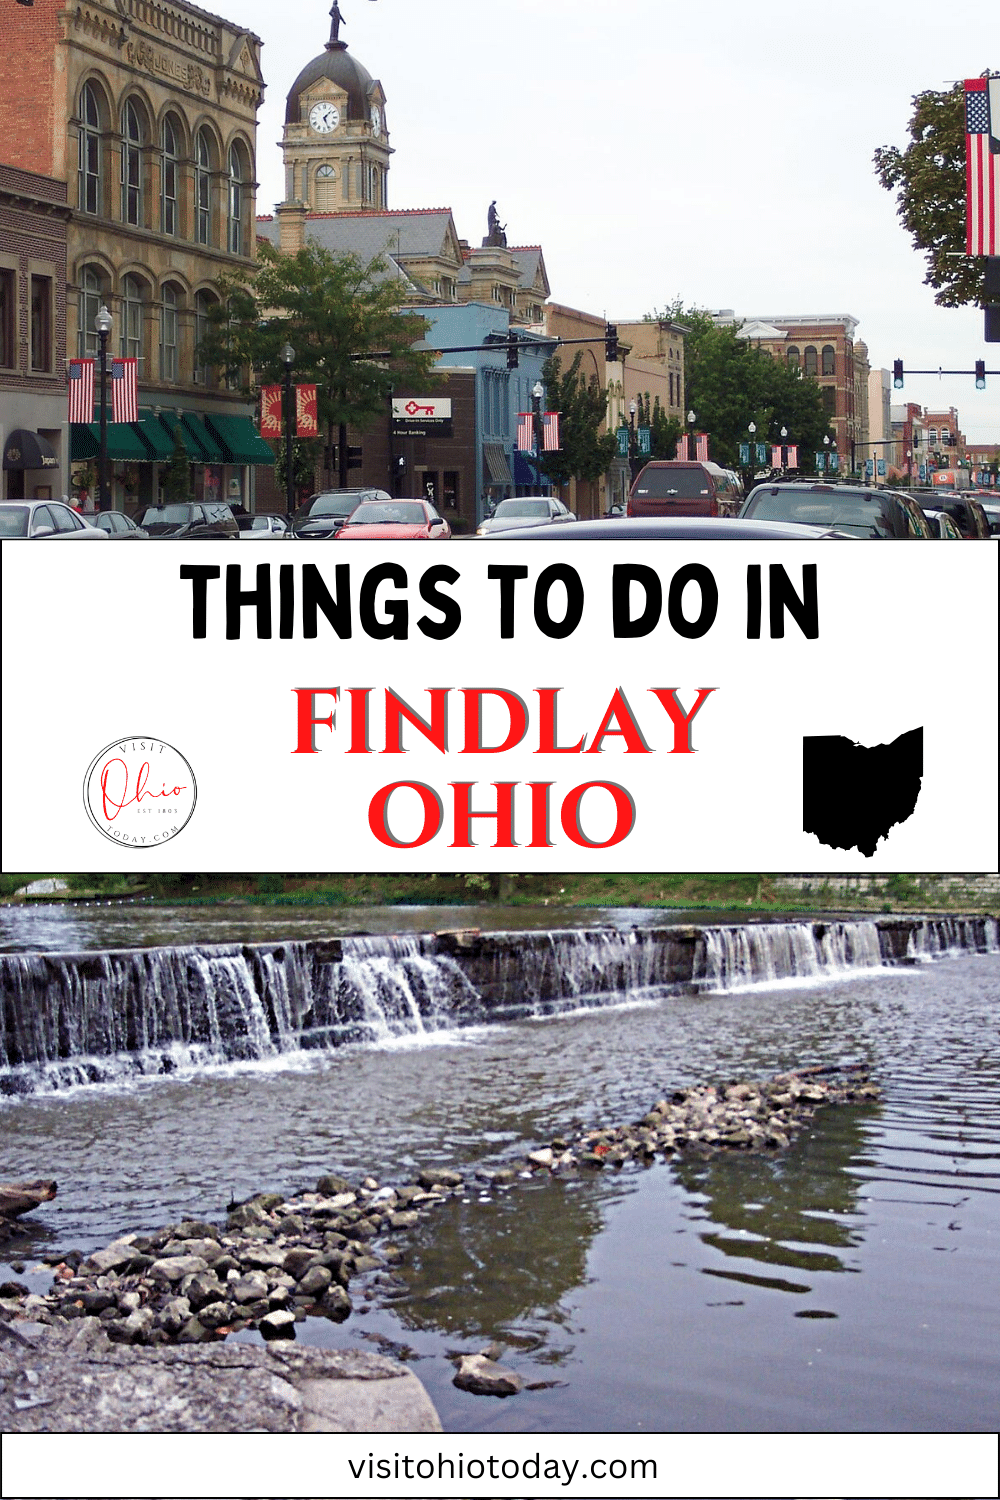 Findlay is known across the United States for its beautiful natural attractions and areas of outstanding beauty. If you love being out in the countryside doing various outdoor activities, then this is the place for you! If you prefer to do things inside, it also boasts art galleries and museums. Below are 15 of the best things to do in Findlay Ohio. | Things To Do In Findlay Ohio | Findlay Ohio | Hancock County